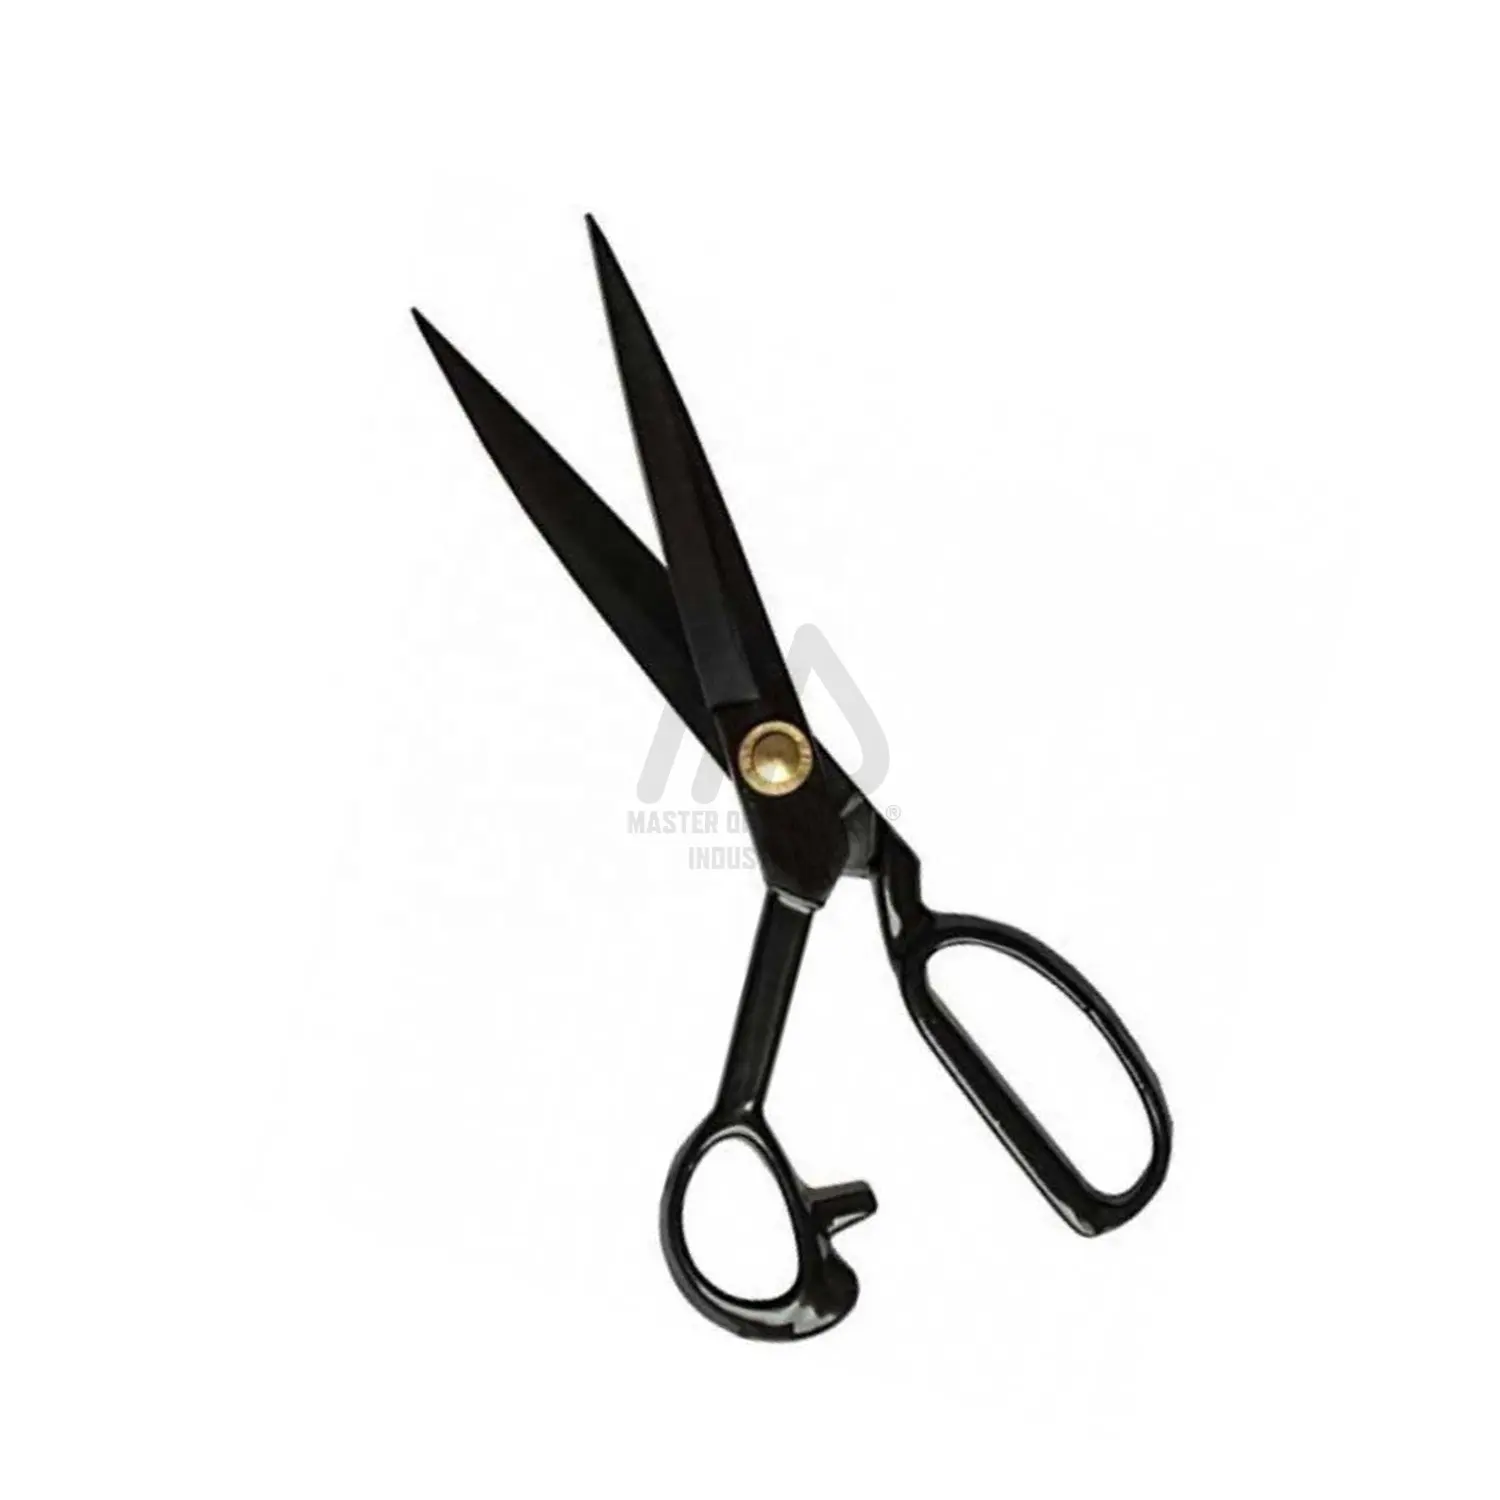 Industrial Textile Sewing Fabric Scissors dress making tailor scissor stainless steel Clothing cutting shears ultra sharp OEM